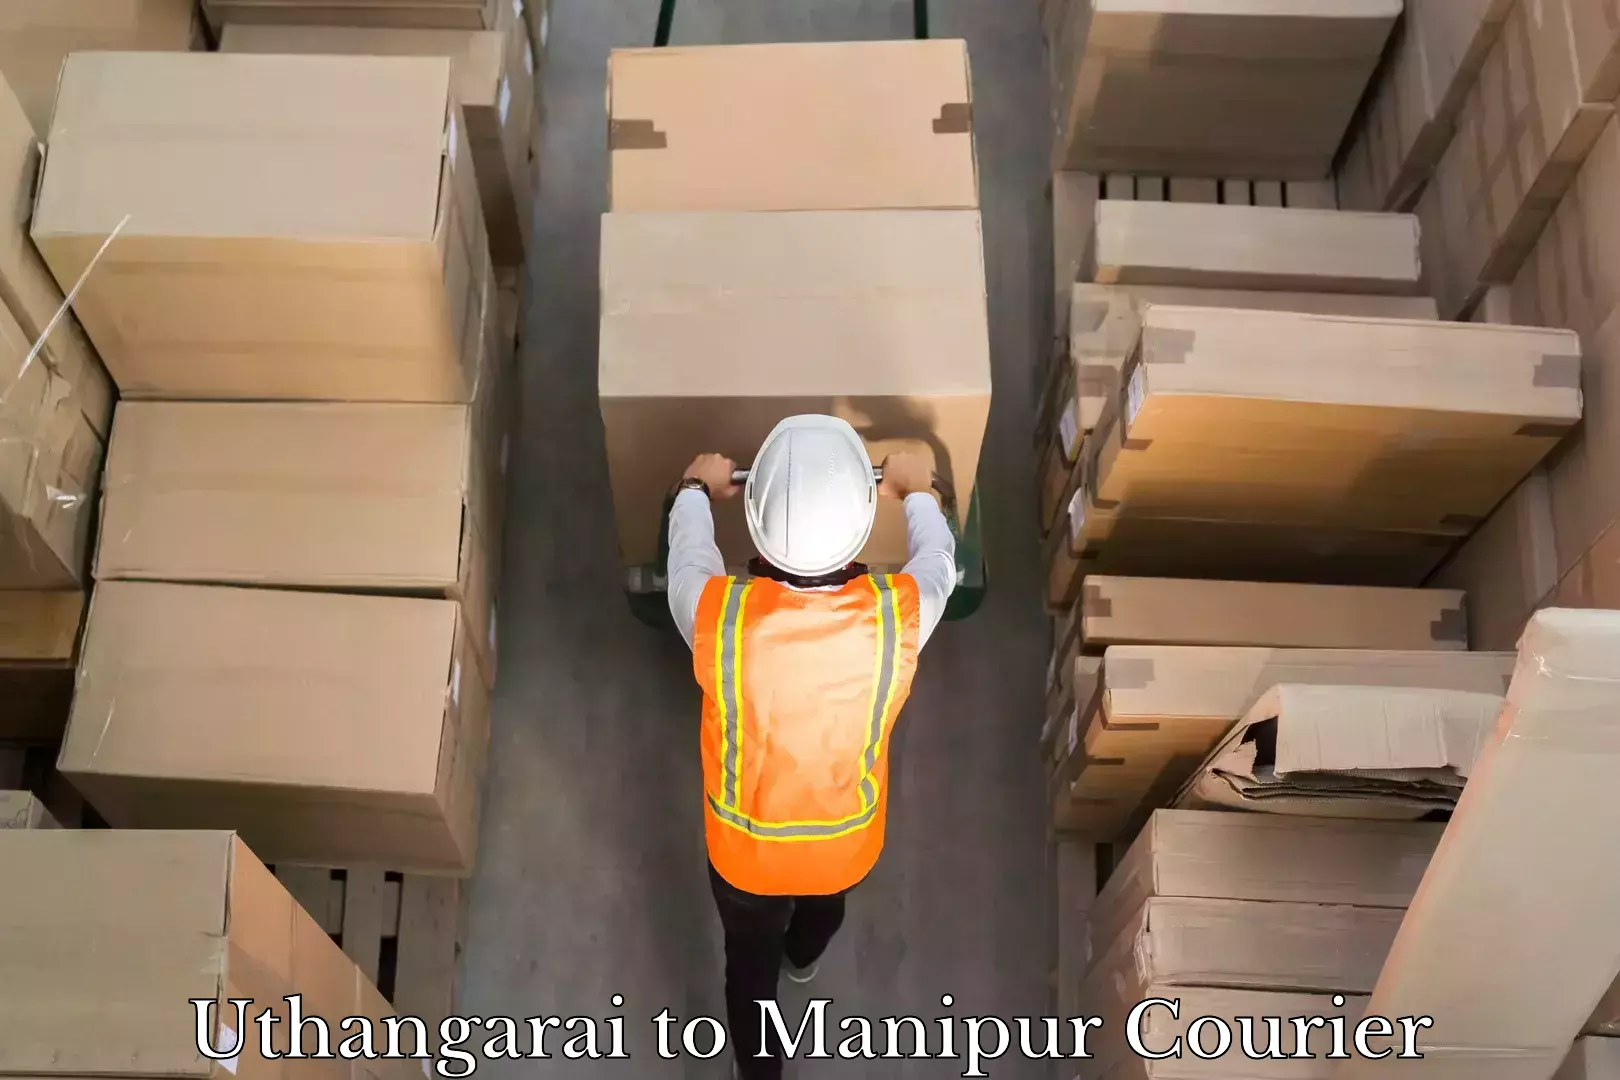 State-of-the-art courier technology Uthangarai to Manipur